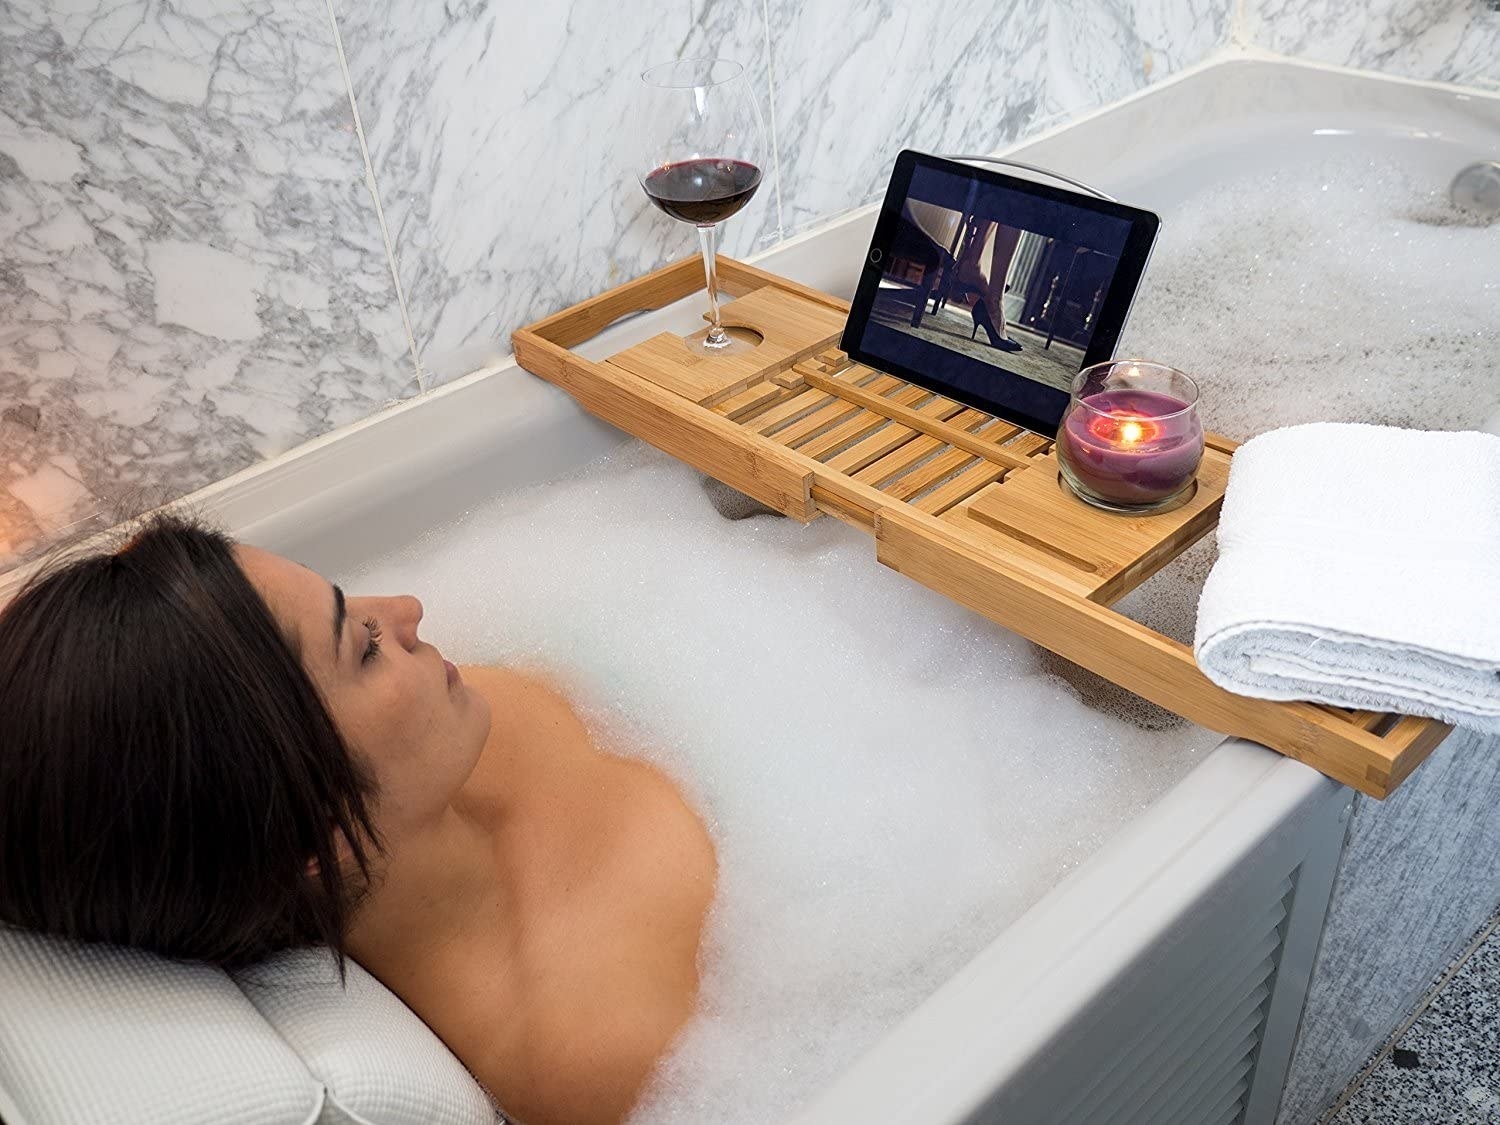 A person lounging in a bubble bath while watching something on a tablet that is sitting on the bathtub tray 